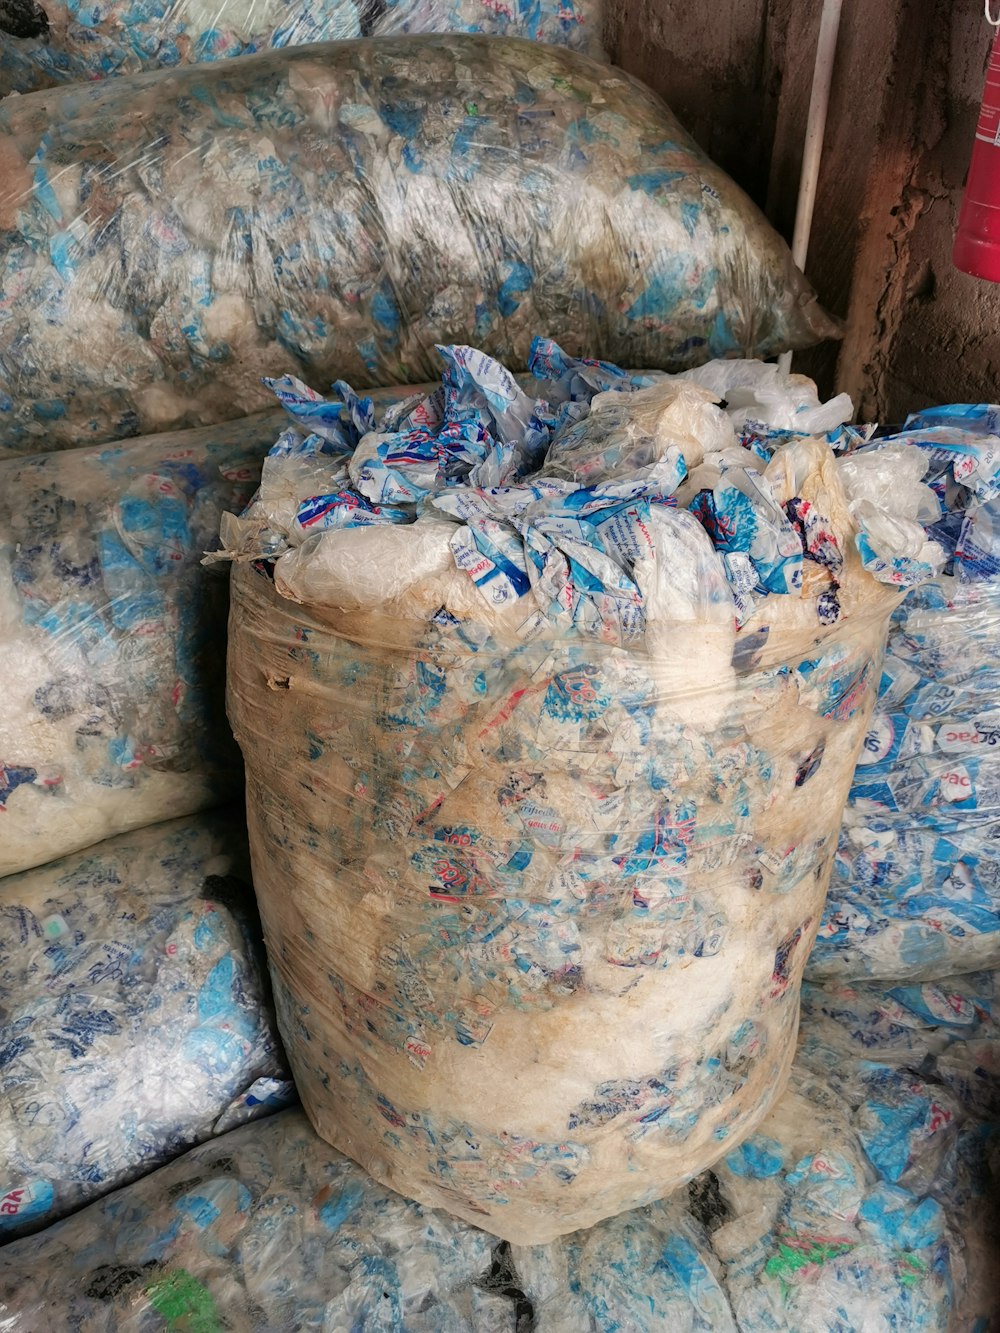 a pile of bags filled with blue and white bags